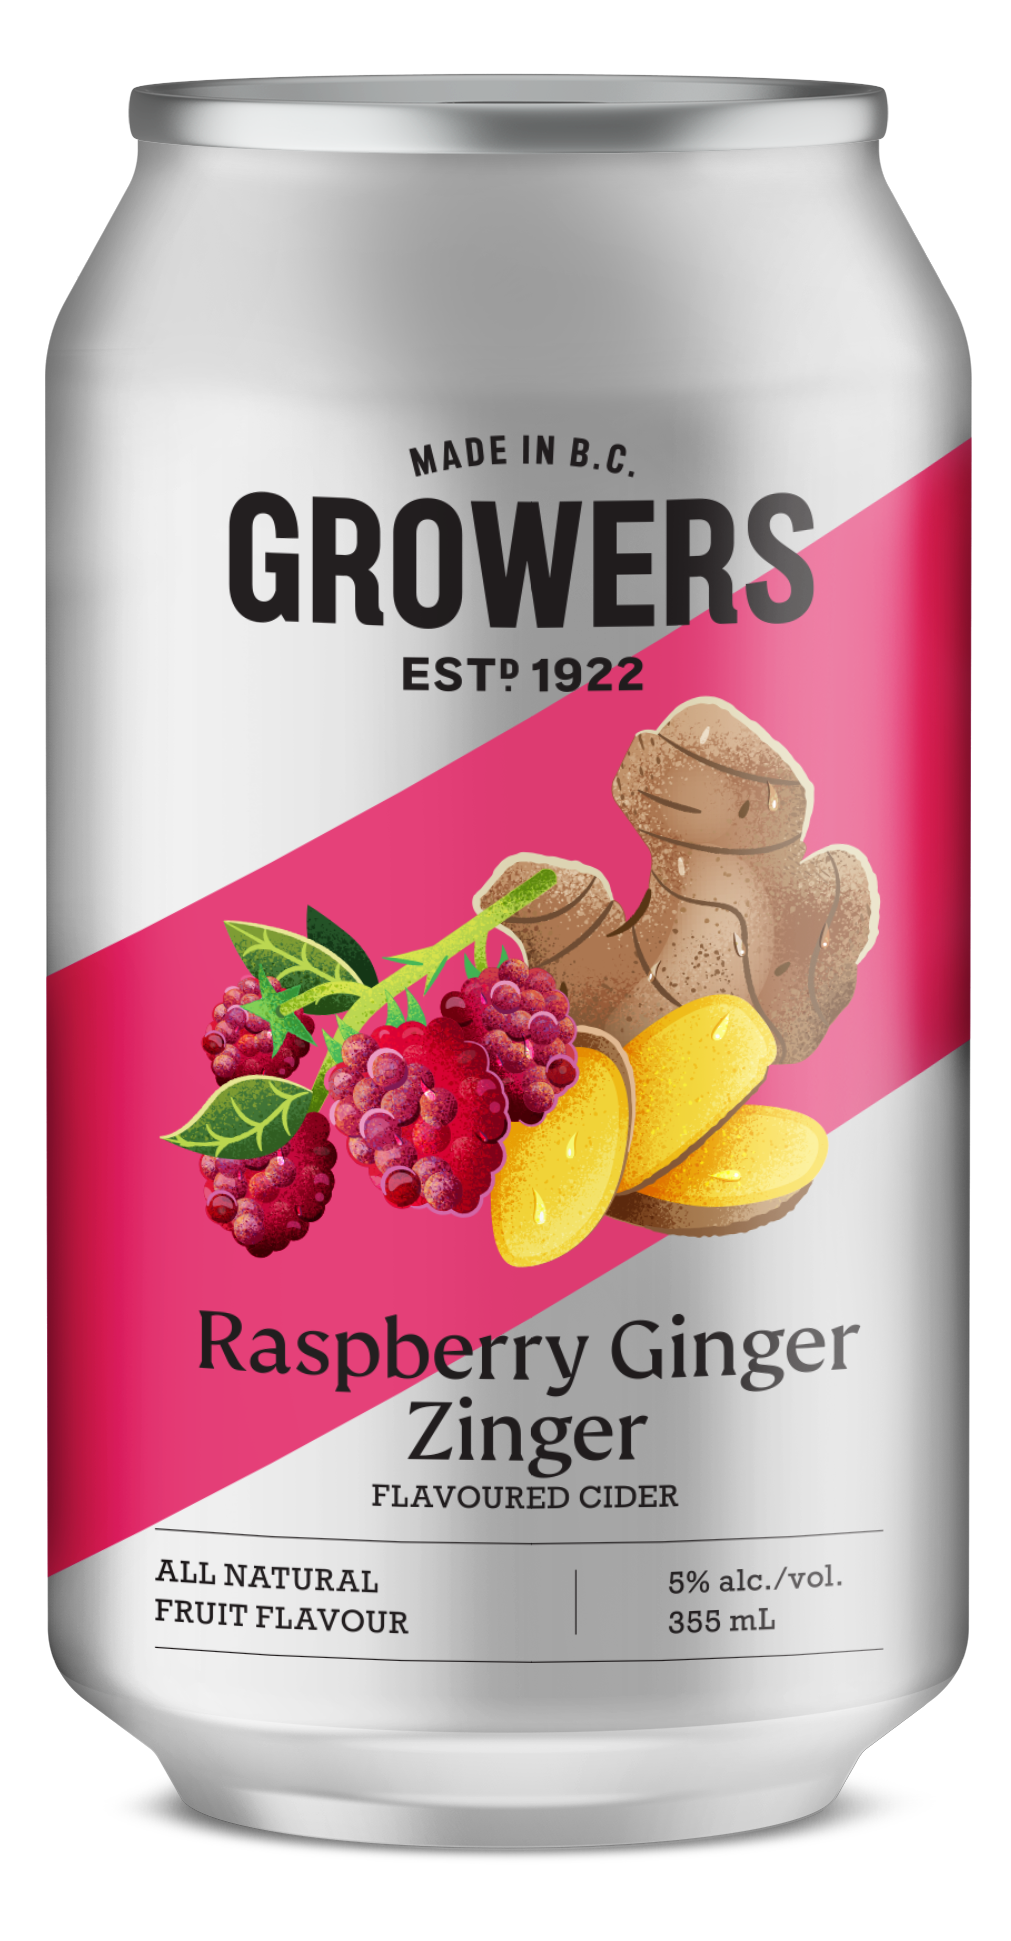 Can of Raspberry Ginger Zinger Growers cider